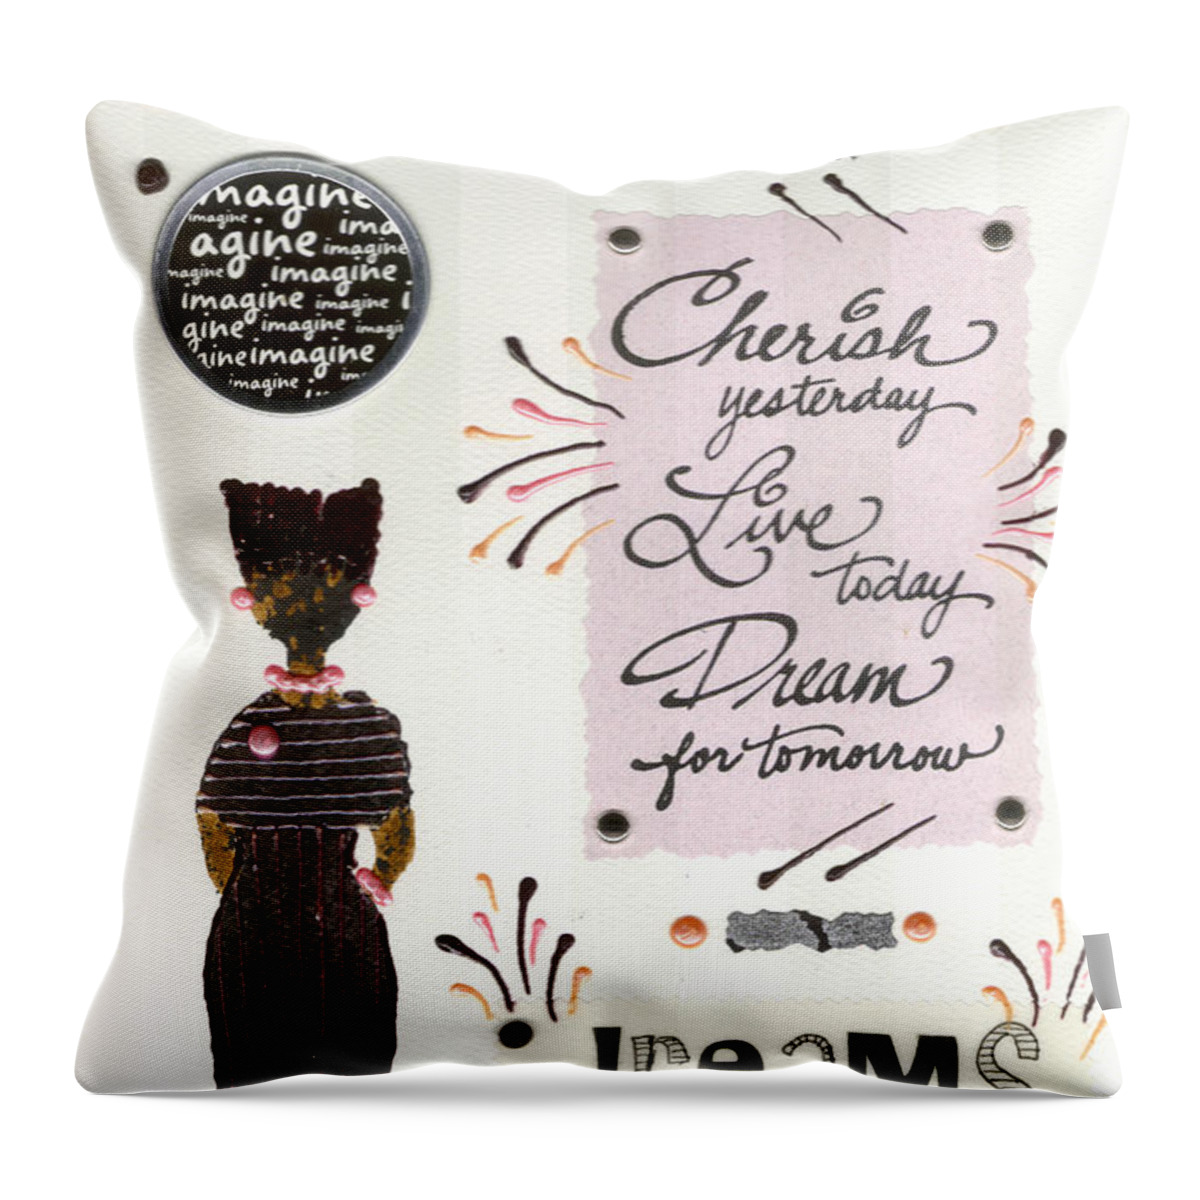 Gretting Cards Throw Pillow featuring the mixed media Dream For Tomorrow by Angela L Walker